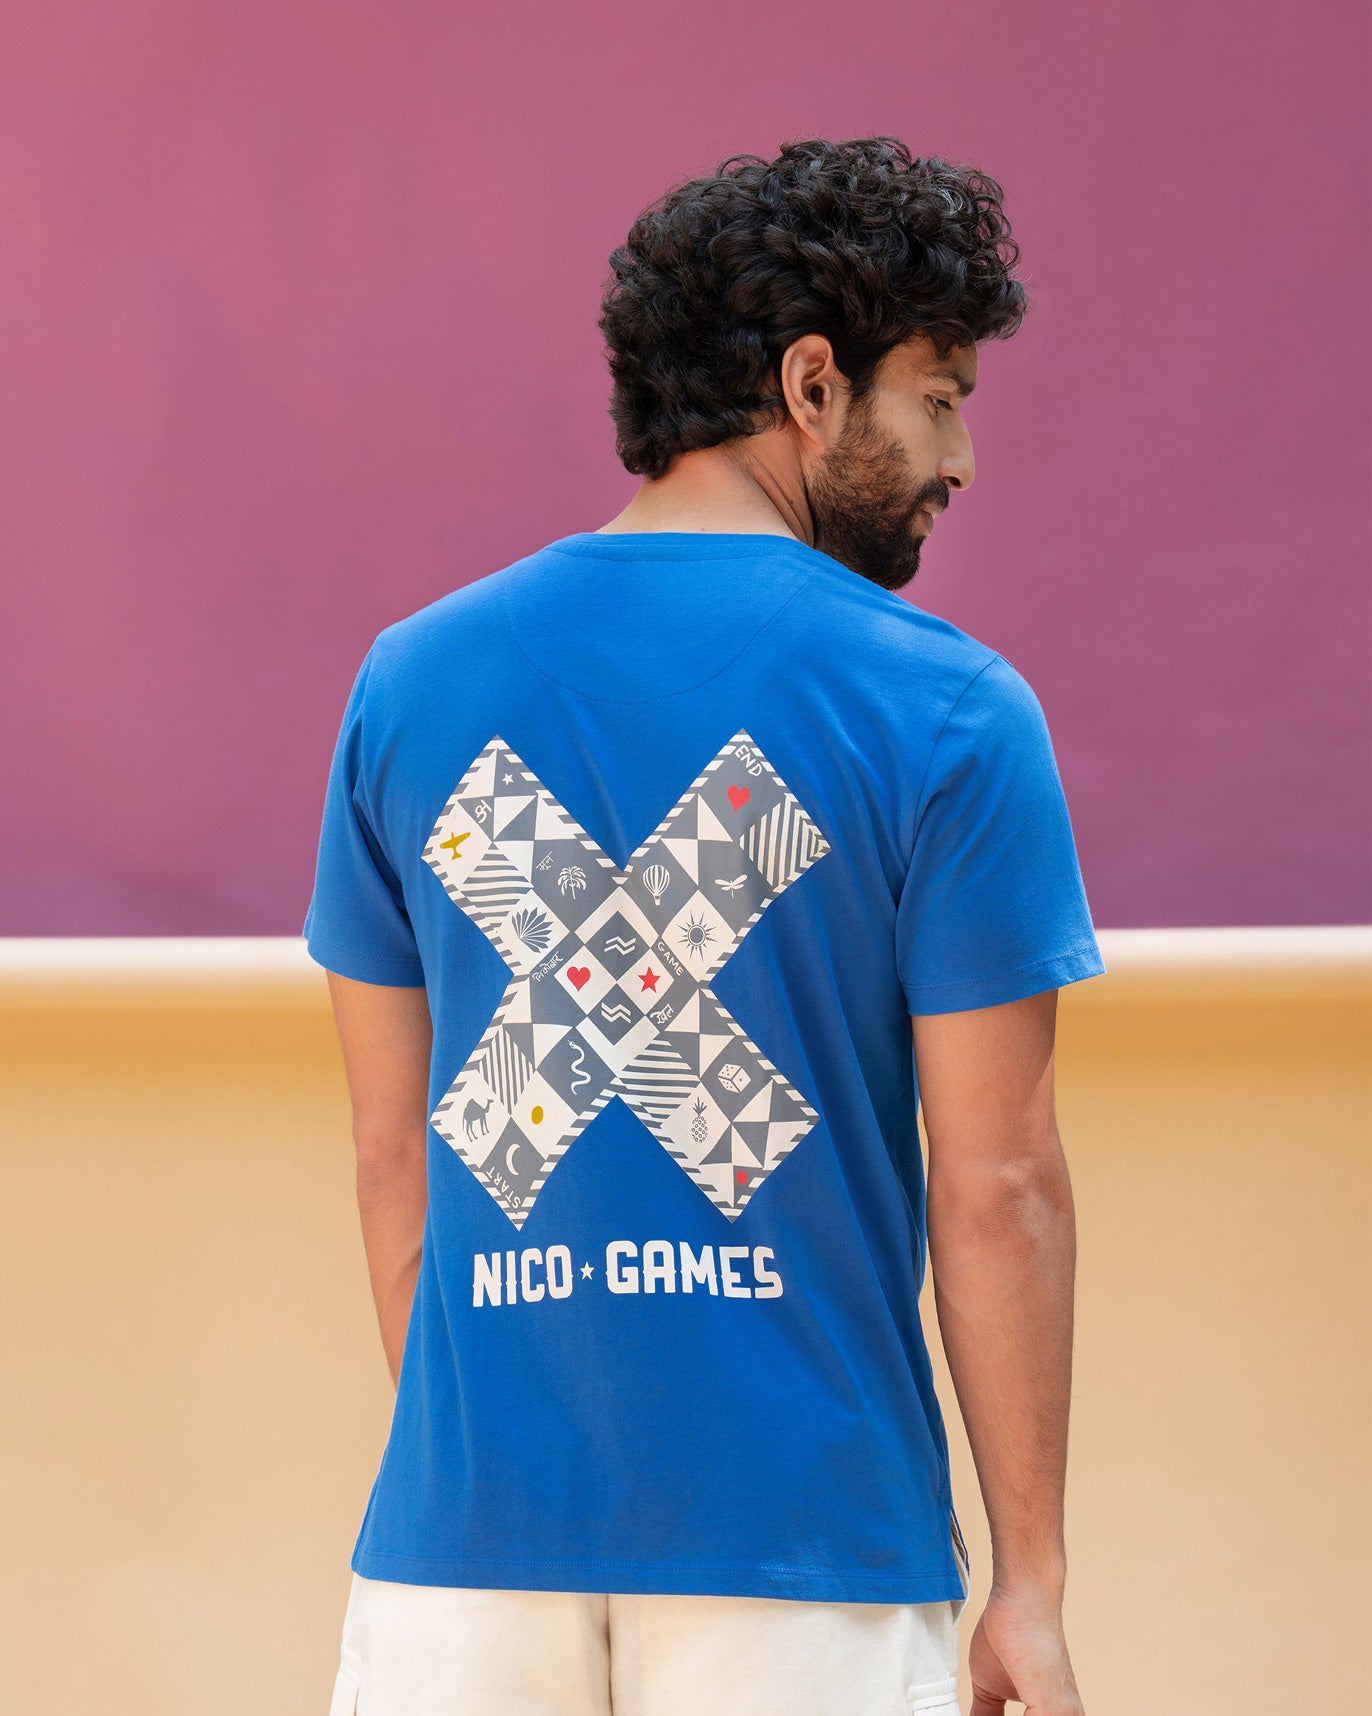 Roll The Dice T-shirt - Blue